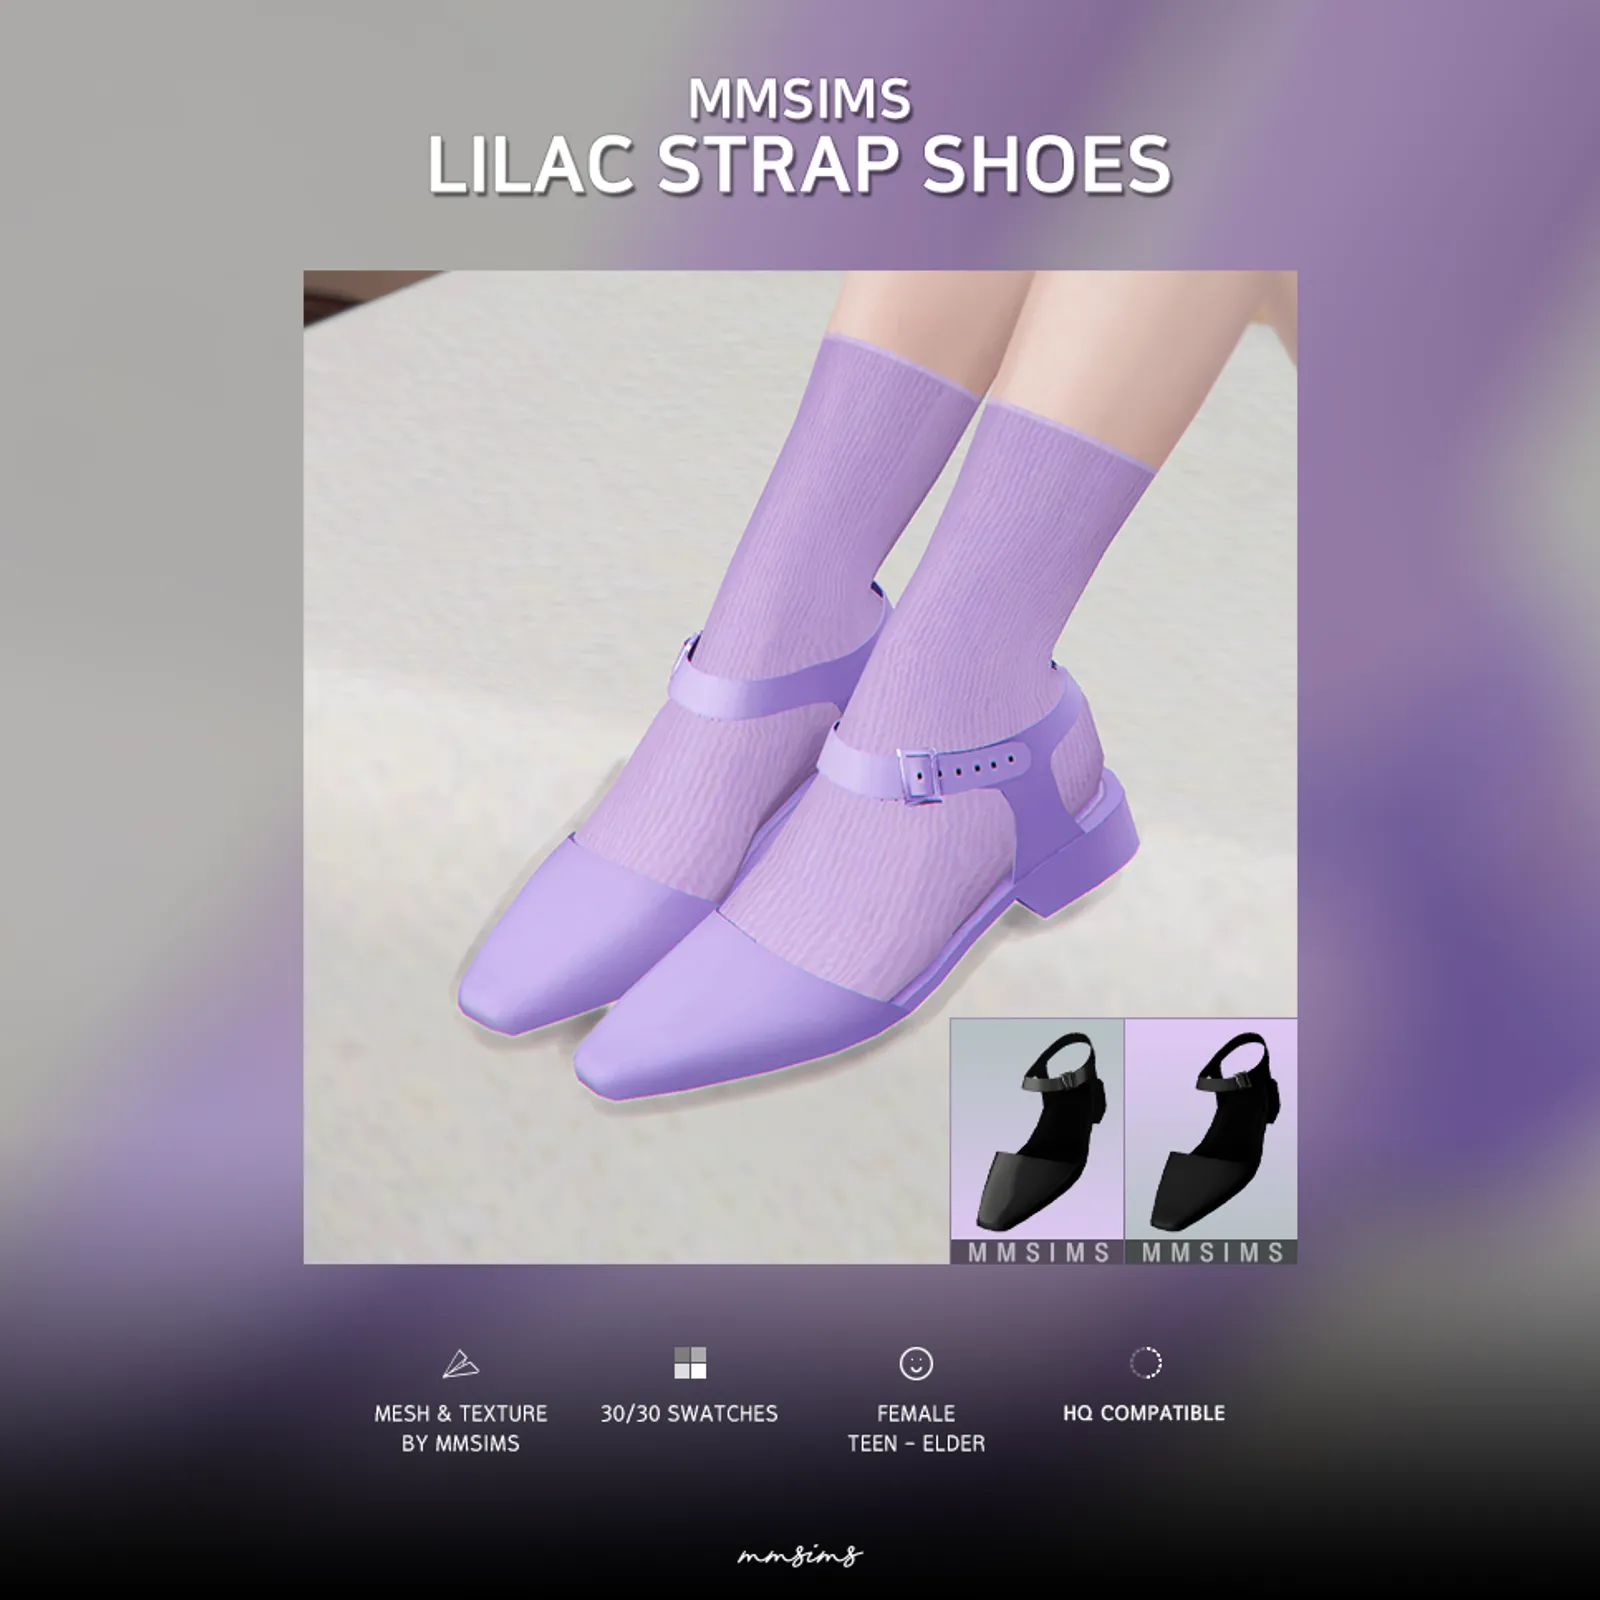 MMSIMS Lilac strap shoes